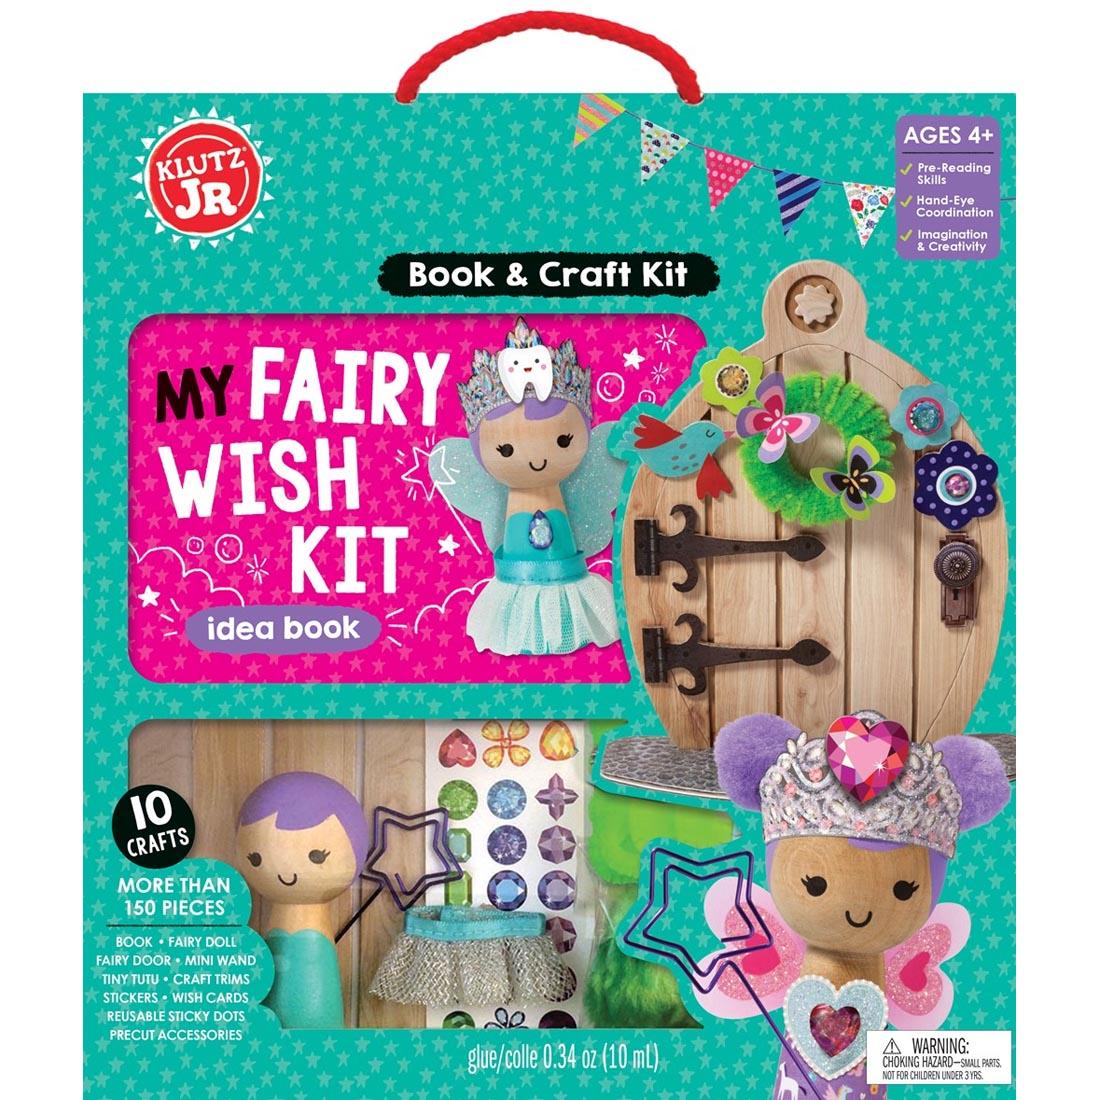 package contents show a wooden fairy doll, a wand, stickers, precut accessories and more